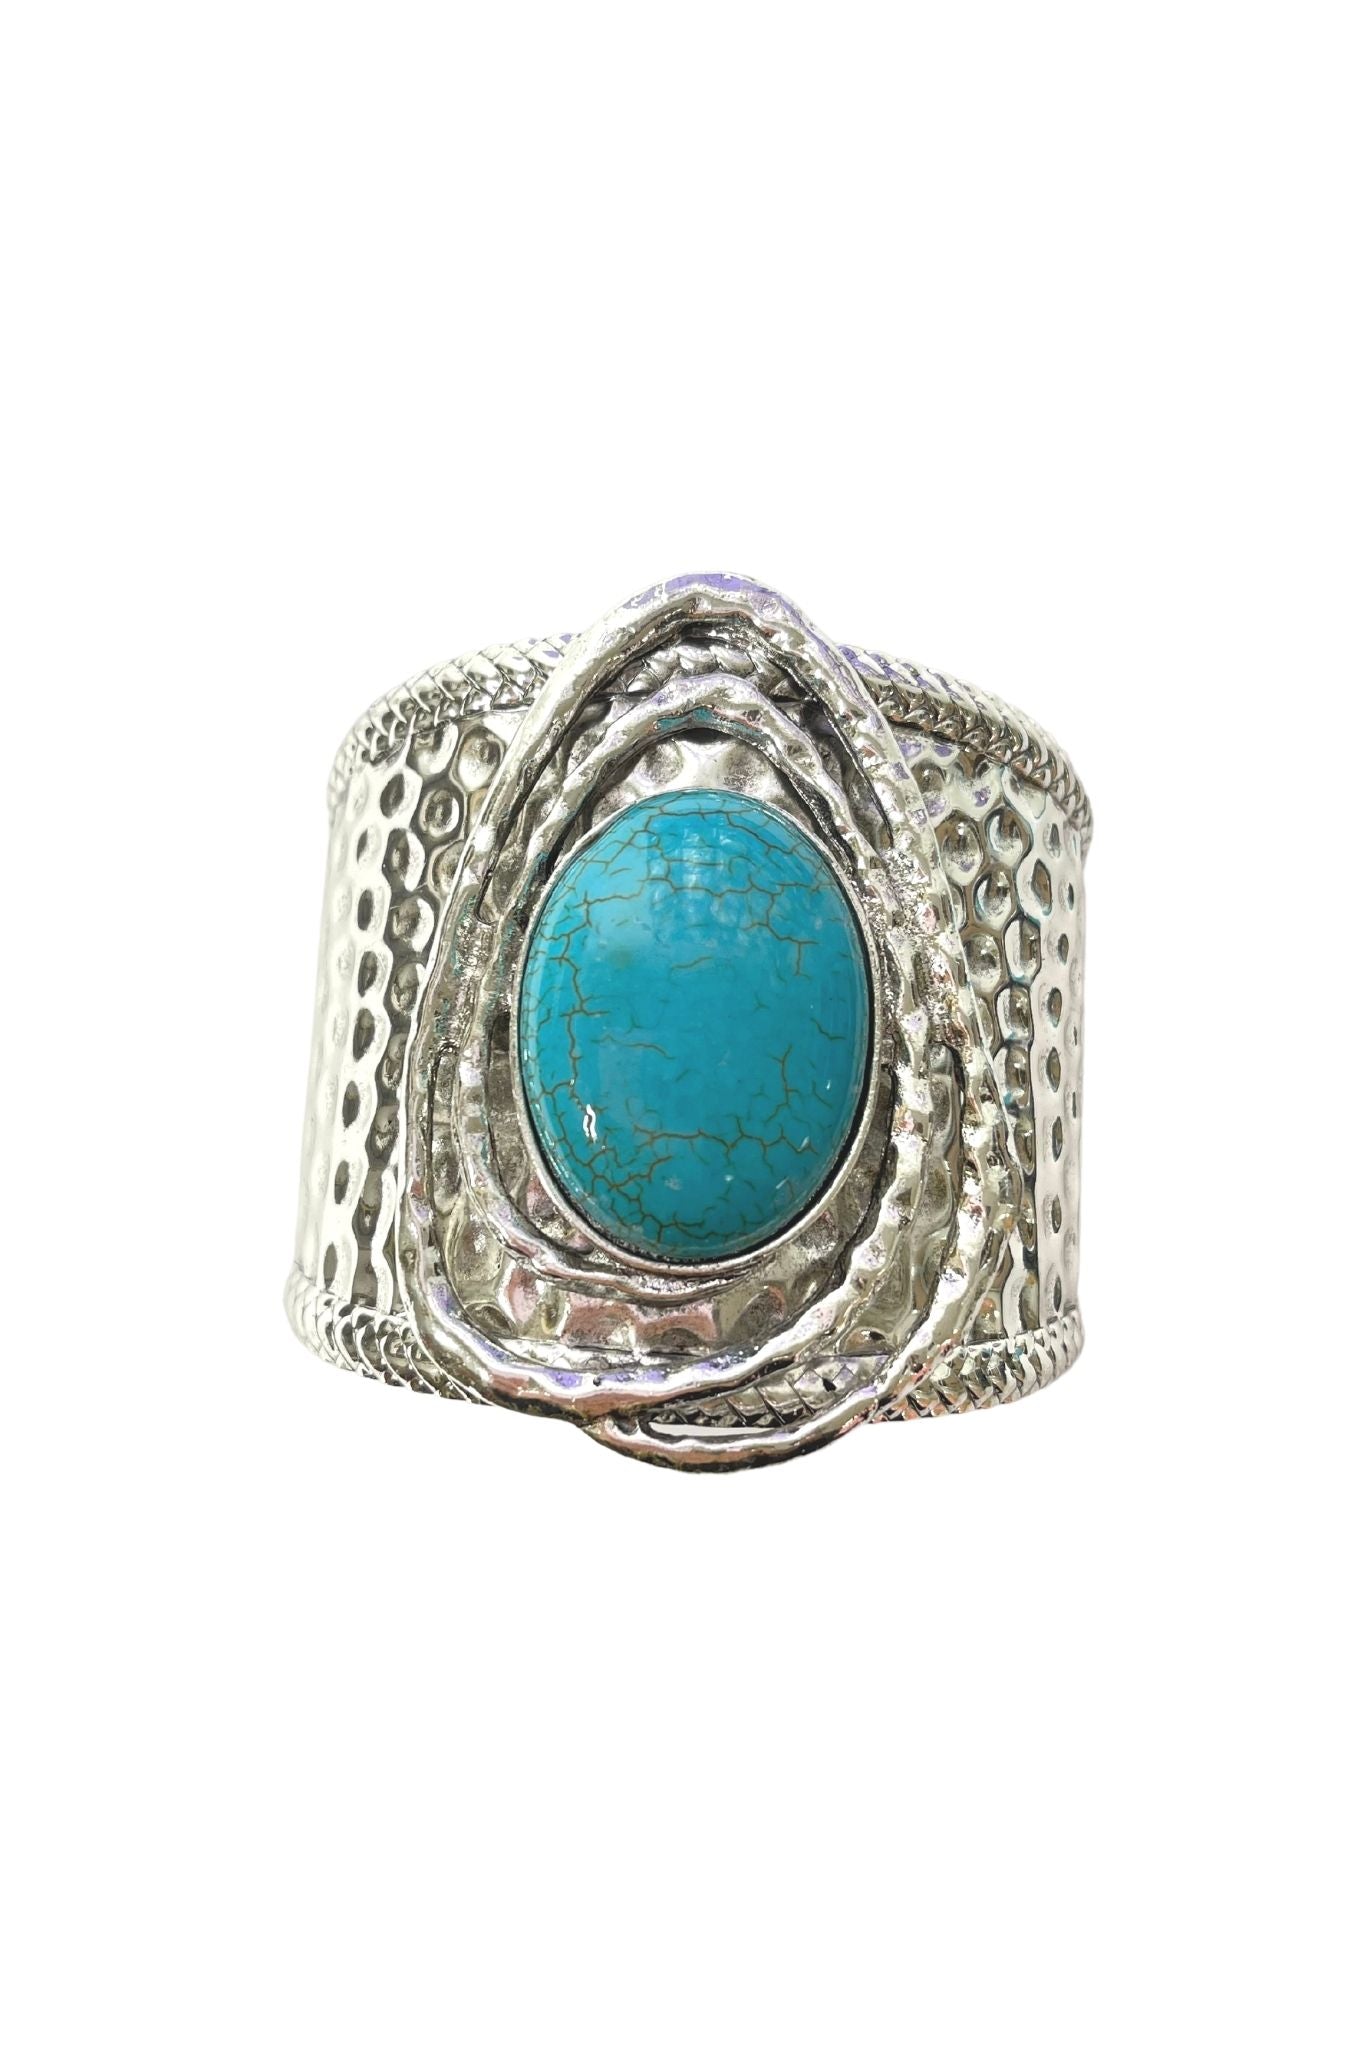 Load image into Gallery viewer, Turquoise And Silver Oversized Western Cuff Bracelet*FINAL SALE*
